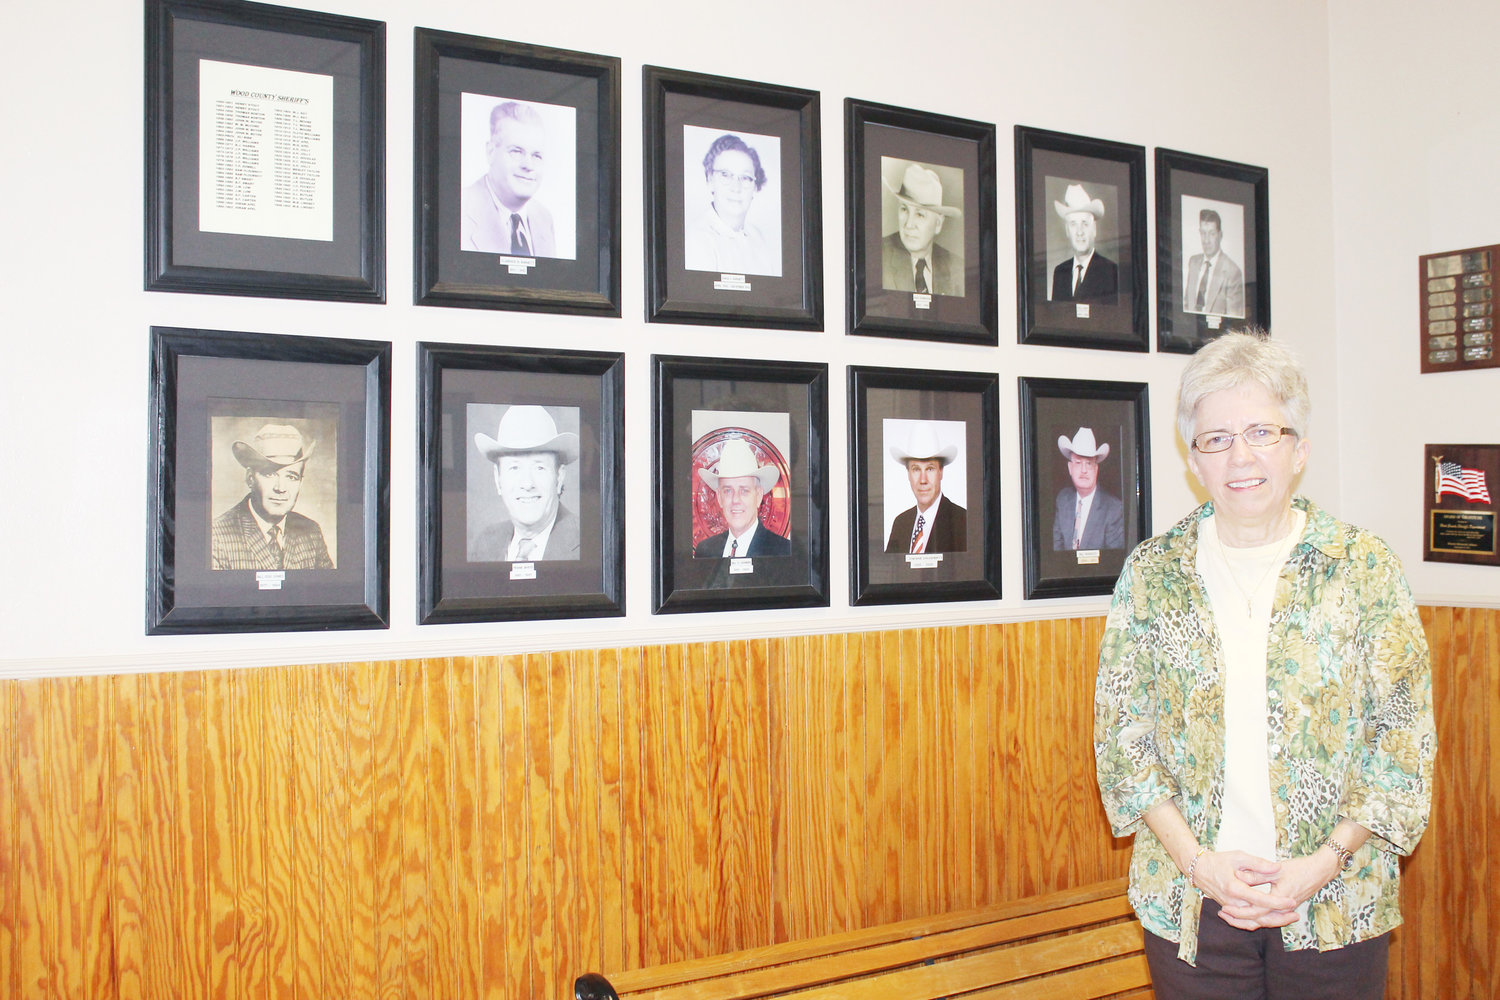 Teri Fox will retire at the end of January after working 38 years at the Wood County Sheriff’s Department. She worked for all  of the sheriffs whose photos are on the bottom row on the wall plus current Sheriff Jim Brown. (Monitor photo by Doris Newman)